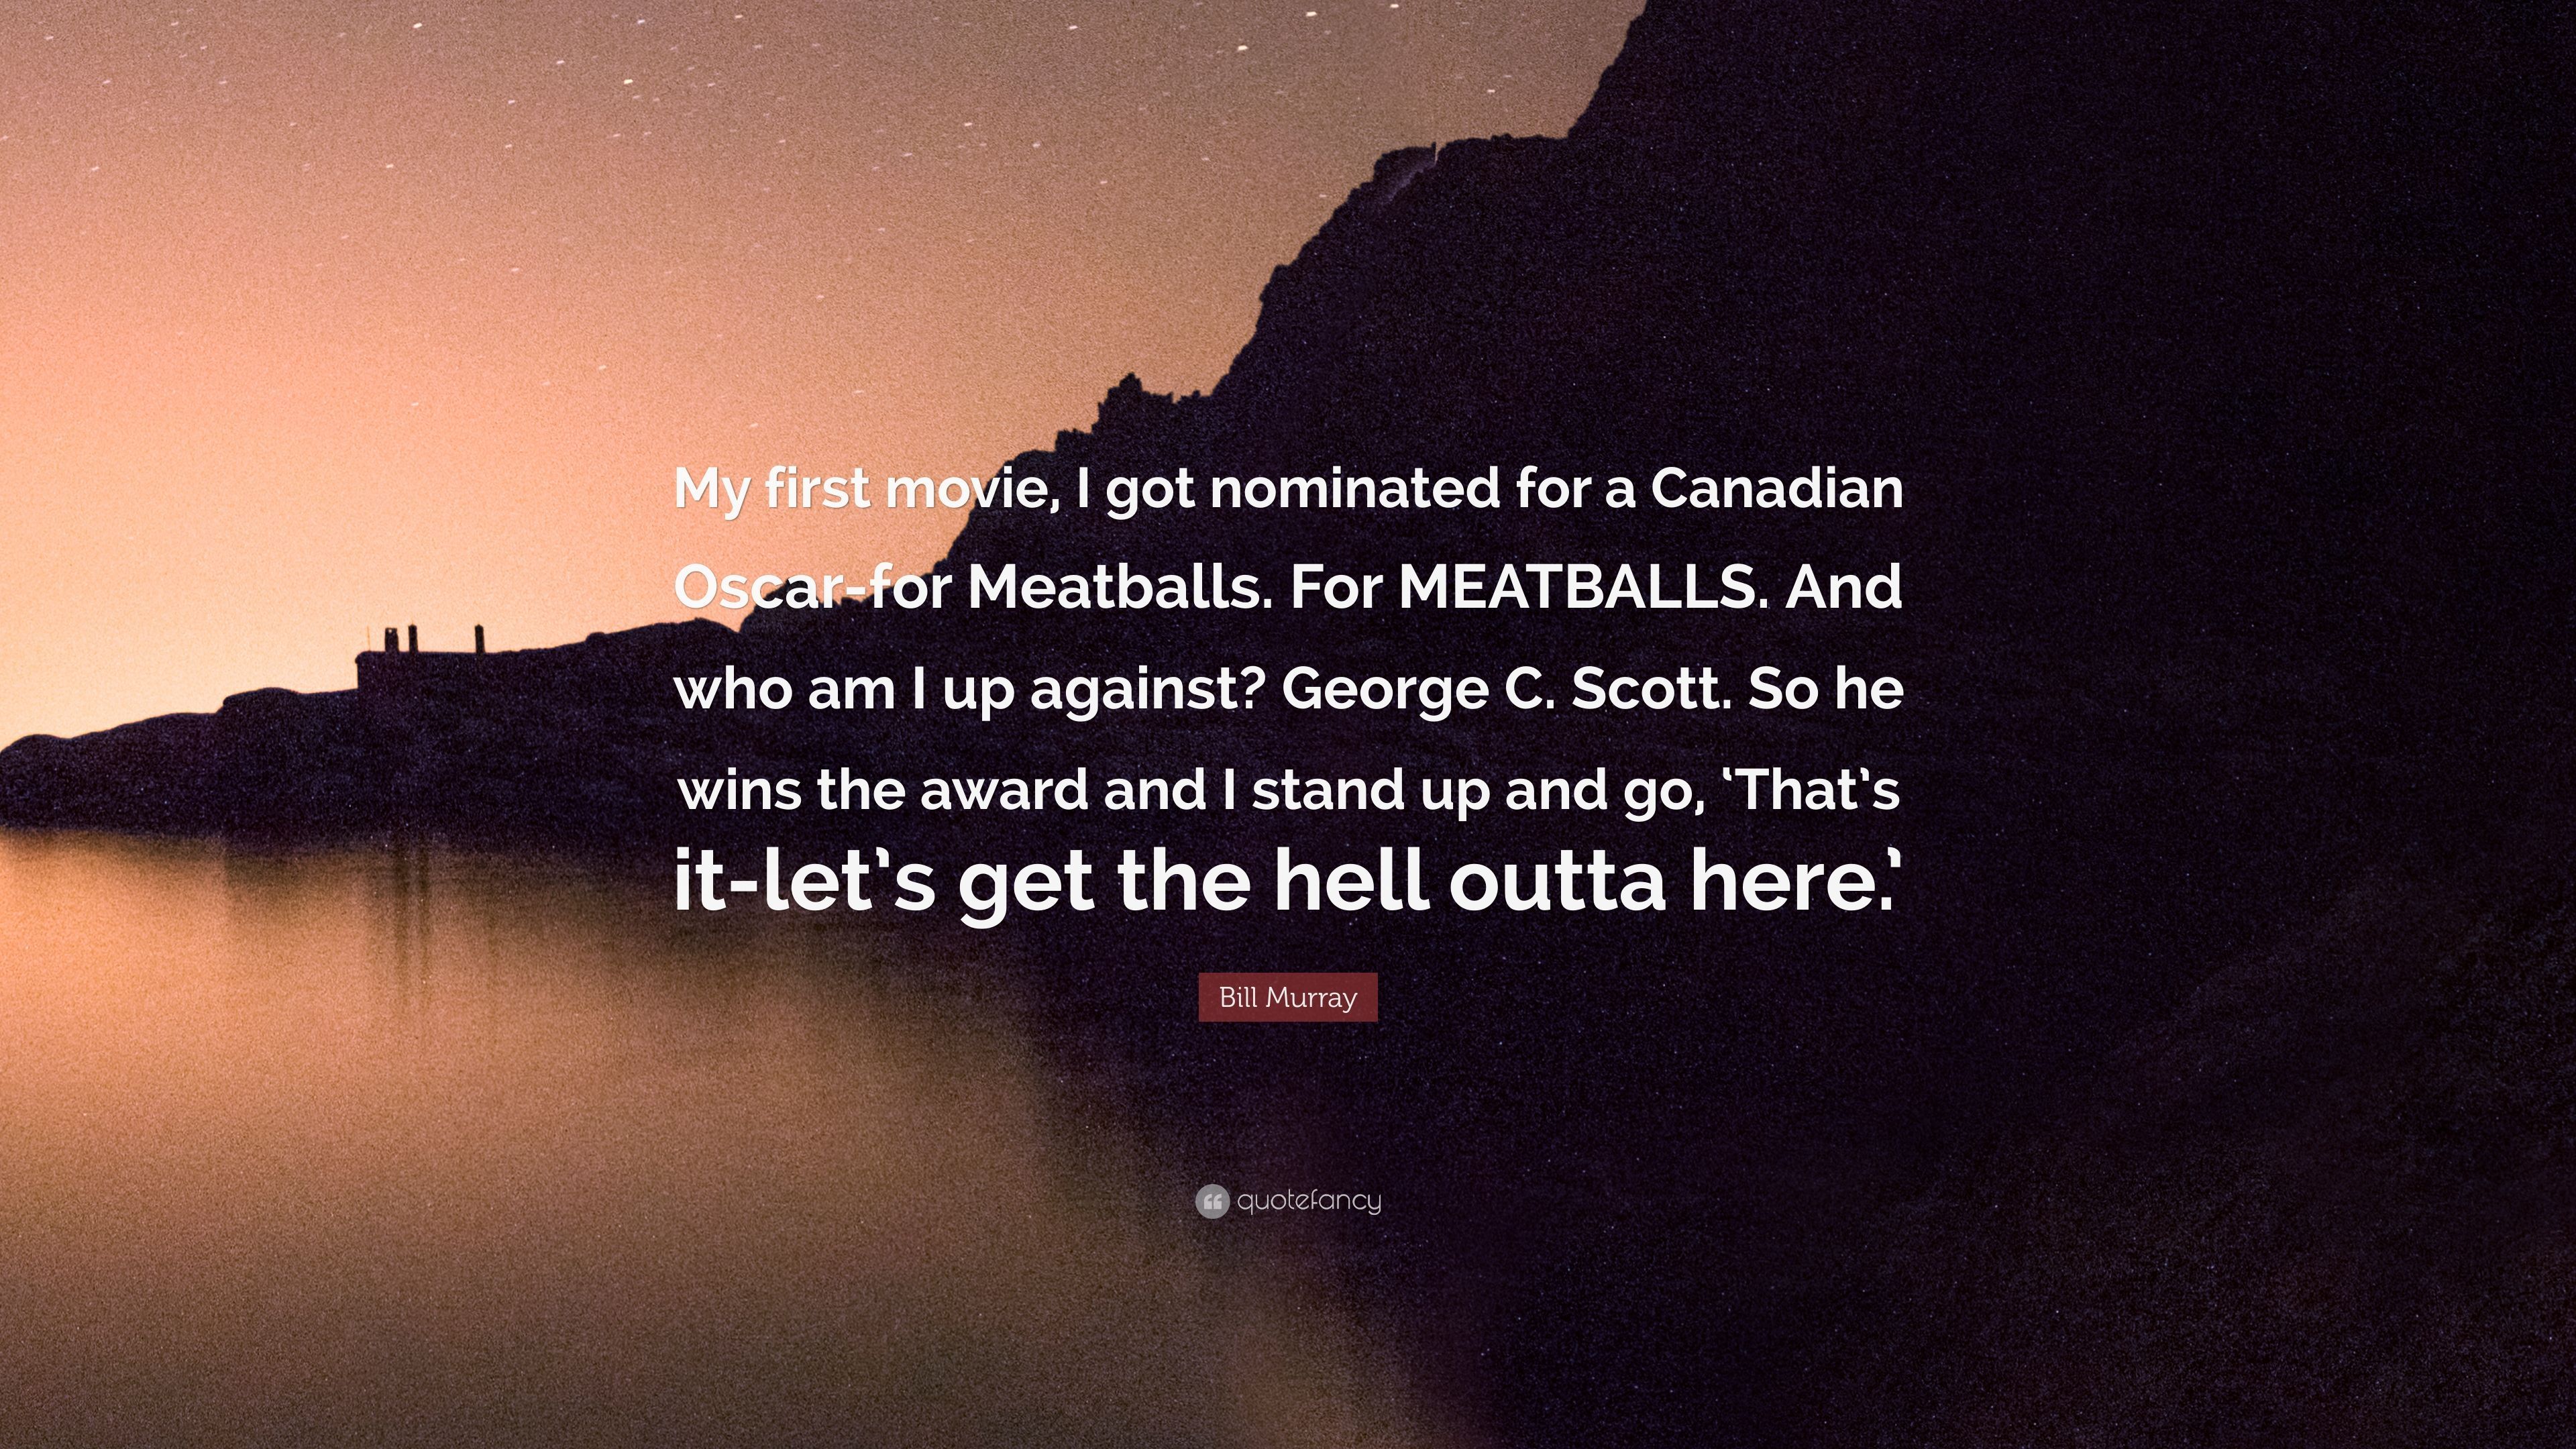 Bill Murray Quote: “My first movie, I got nominated for a Canadian